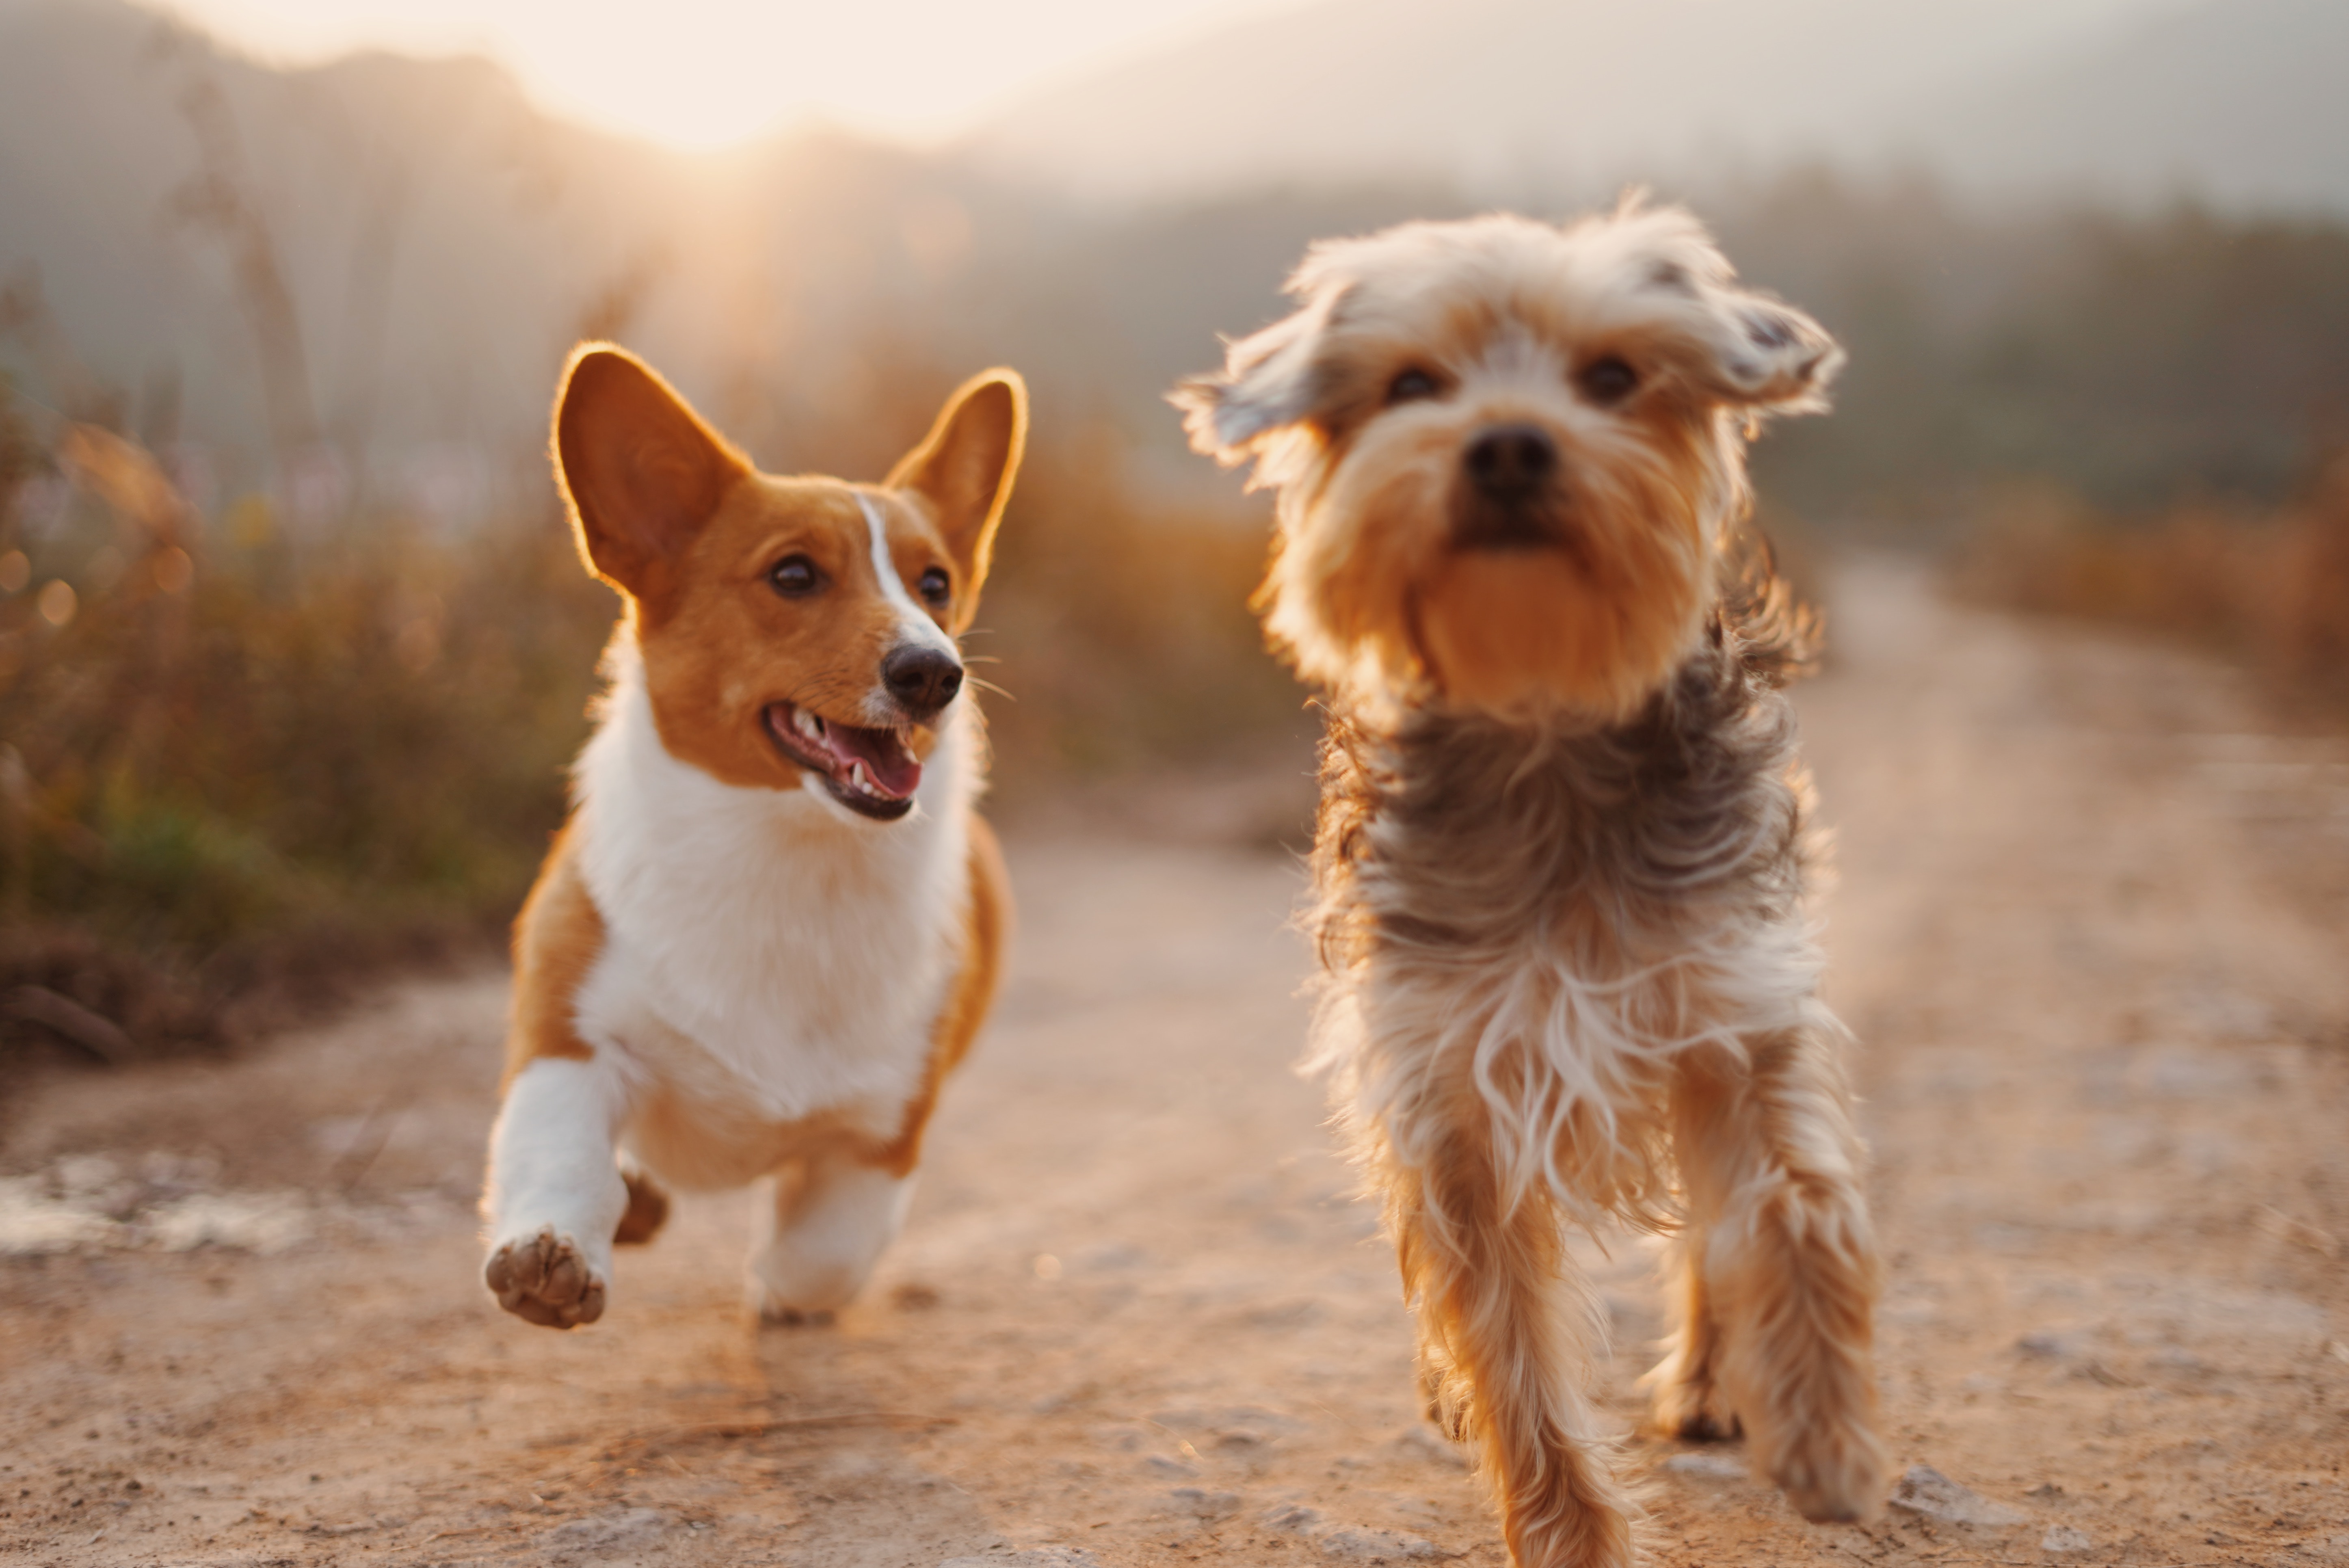 Dogs Running together